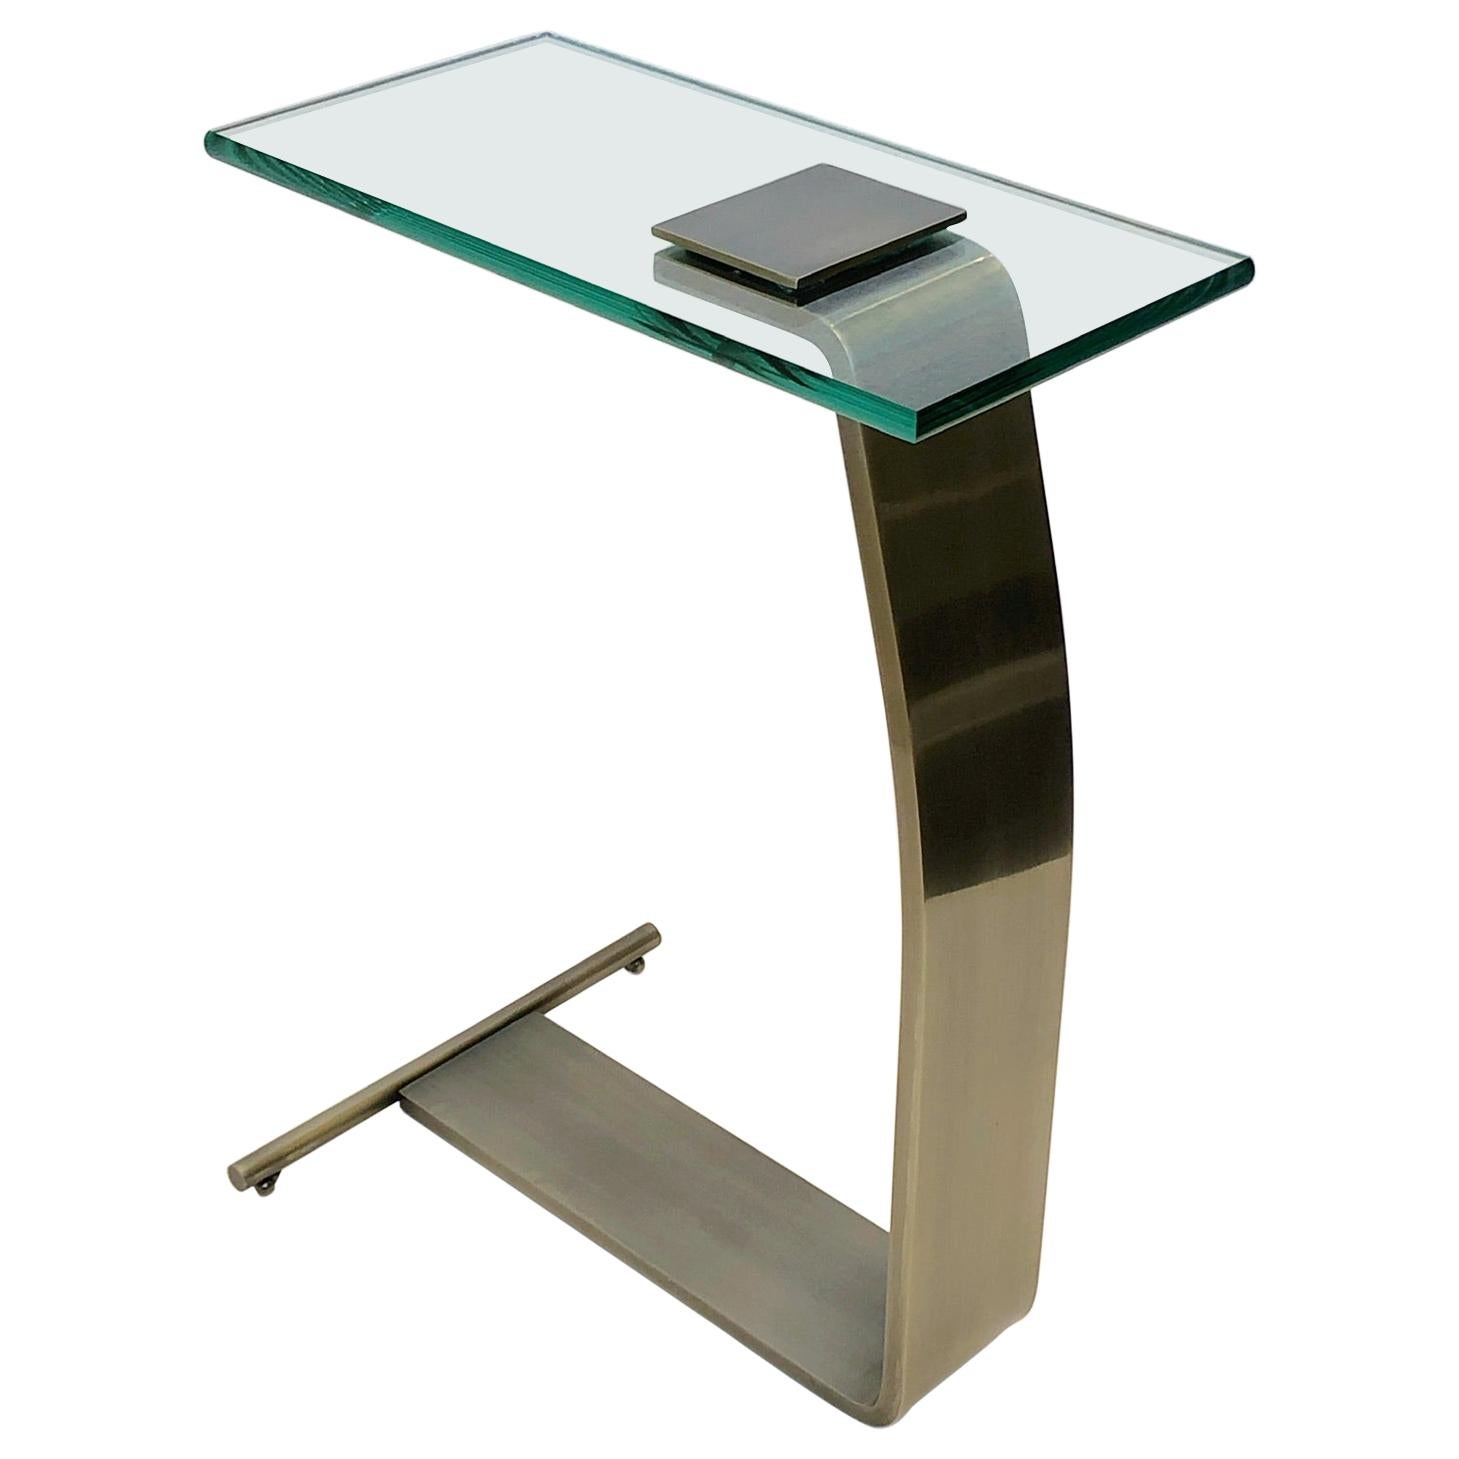 Stainless Steel and Glass Occasional Table by Design Institute of America